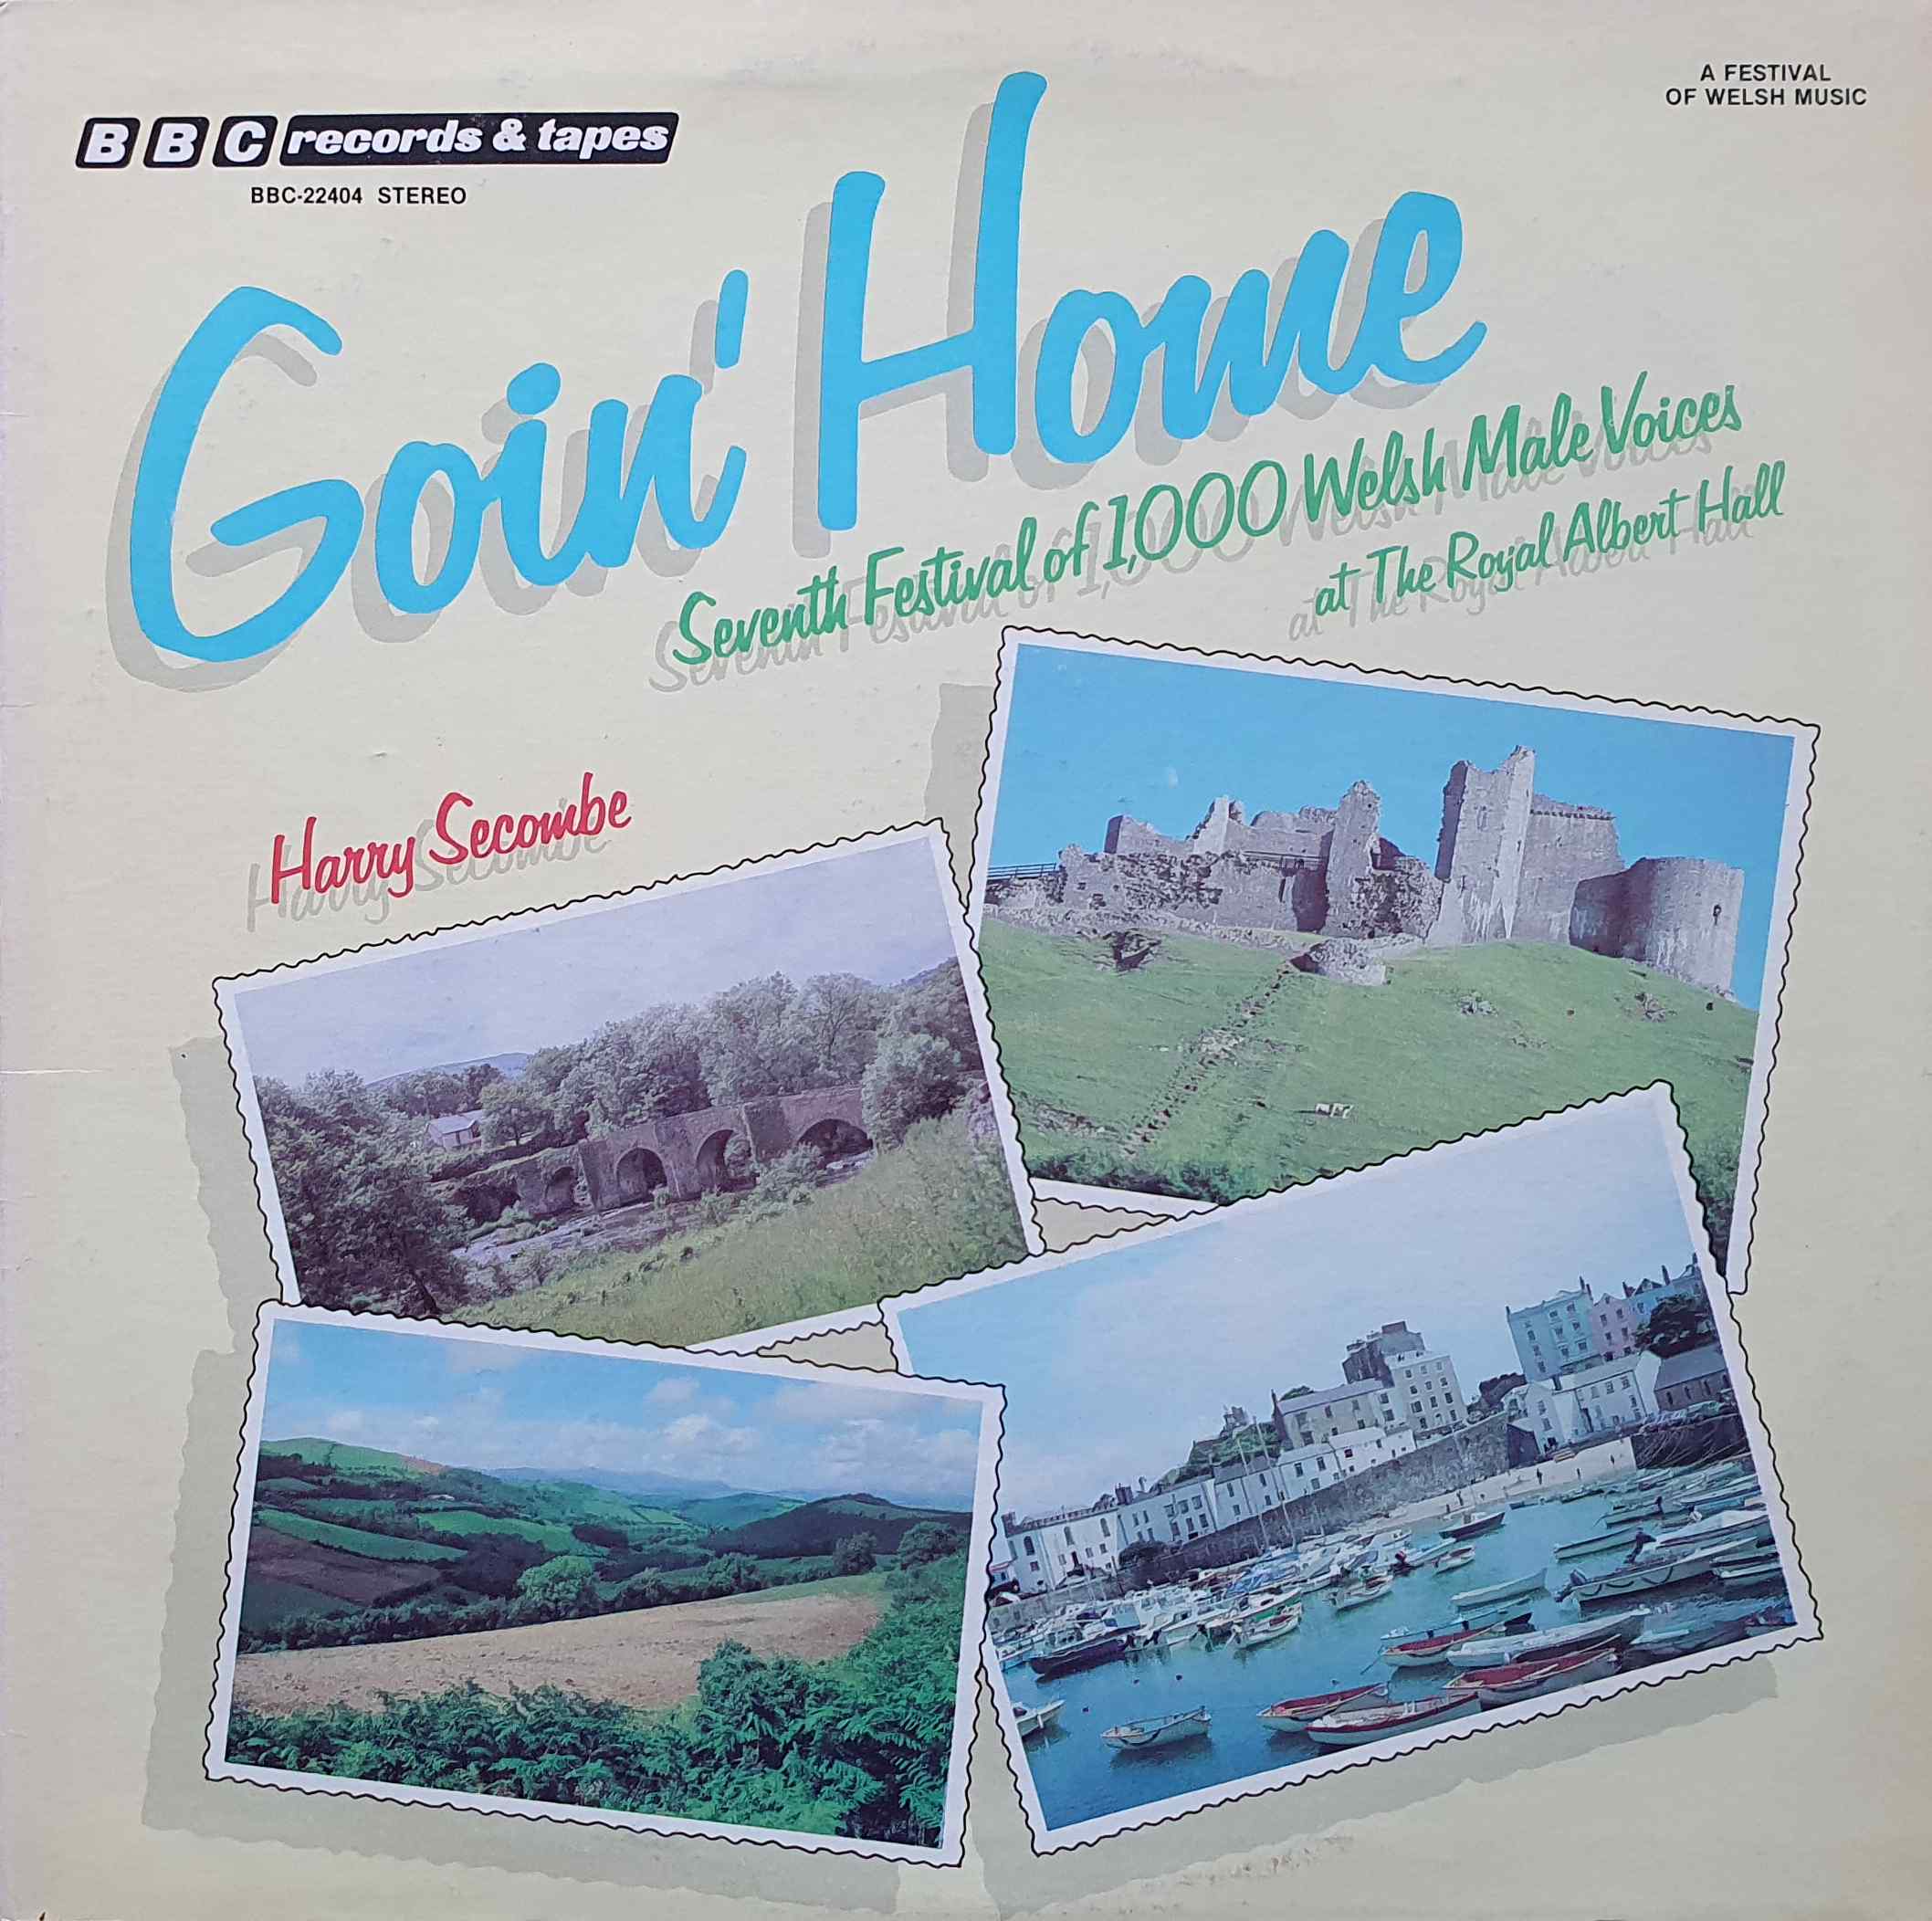 Picture of BBC - 22404 Goin' home - 1000 Welsh male voices (US import) by artist Various from the BBC albums - Records and Tapes library